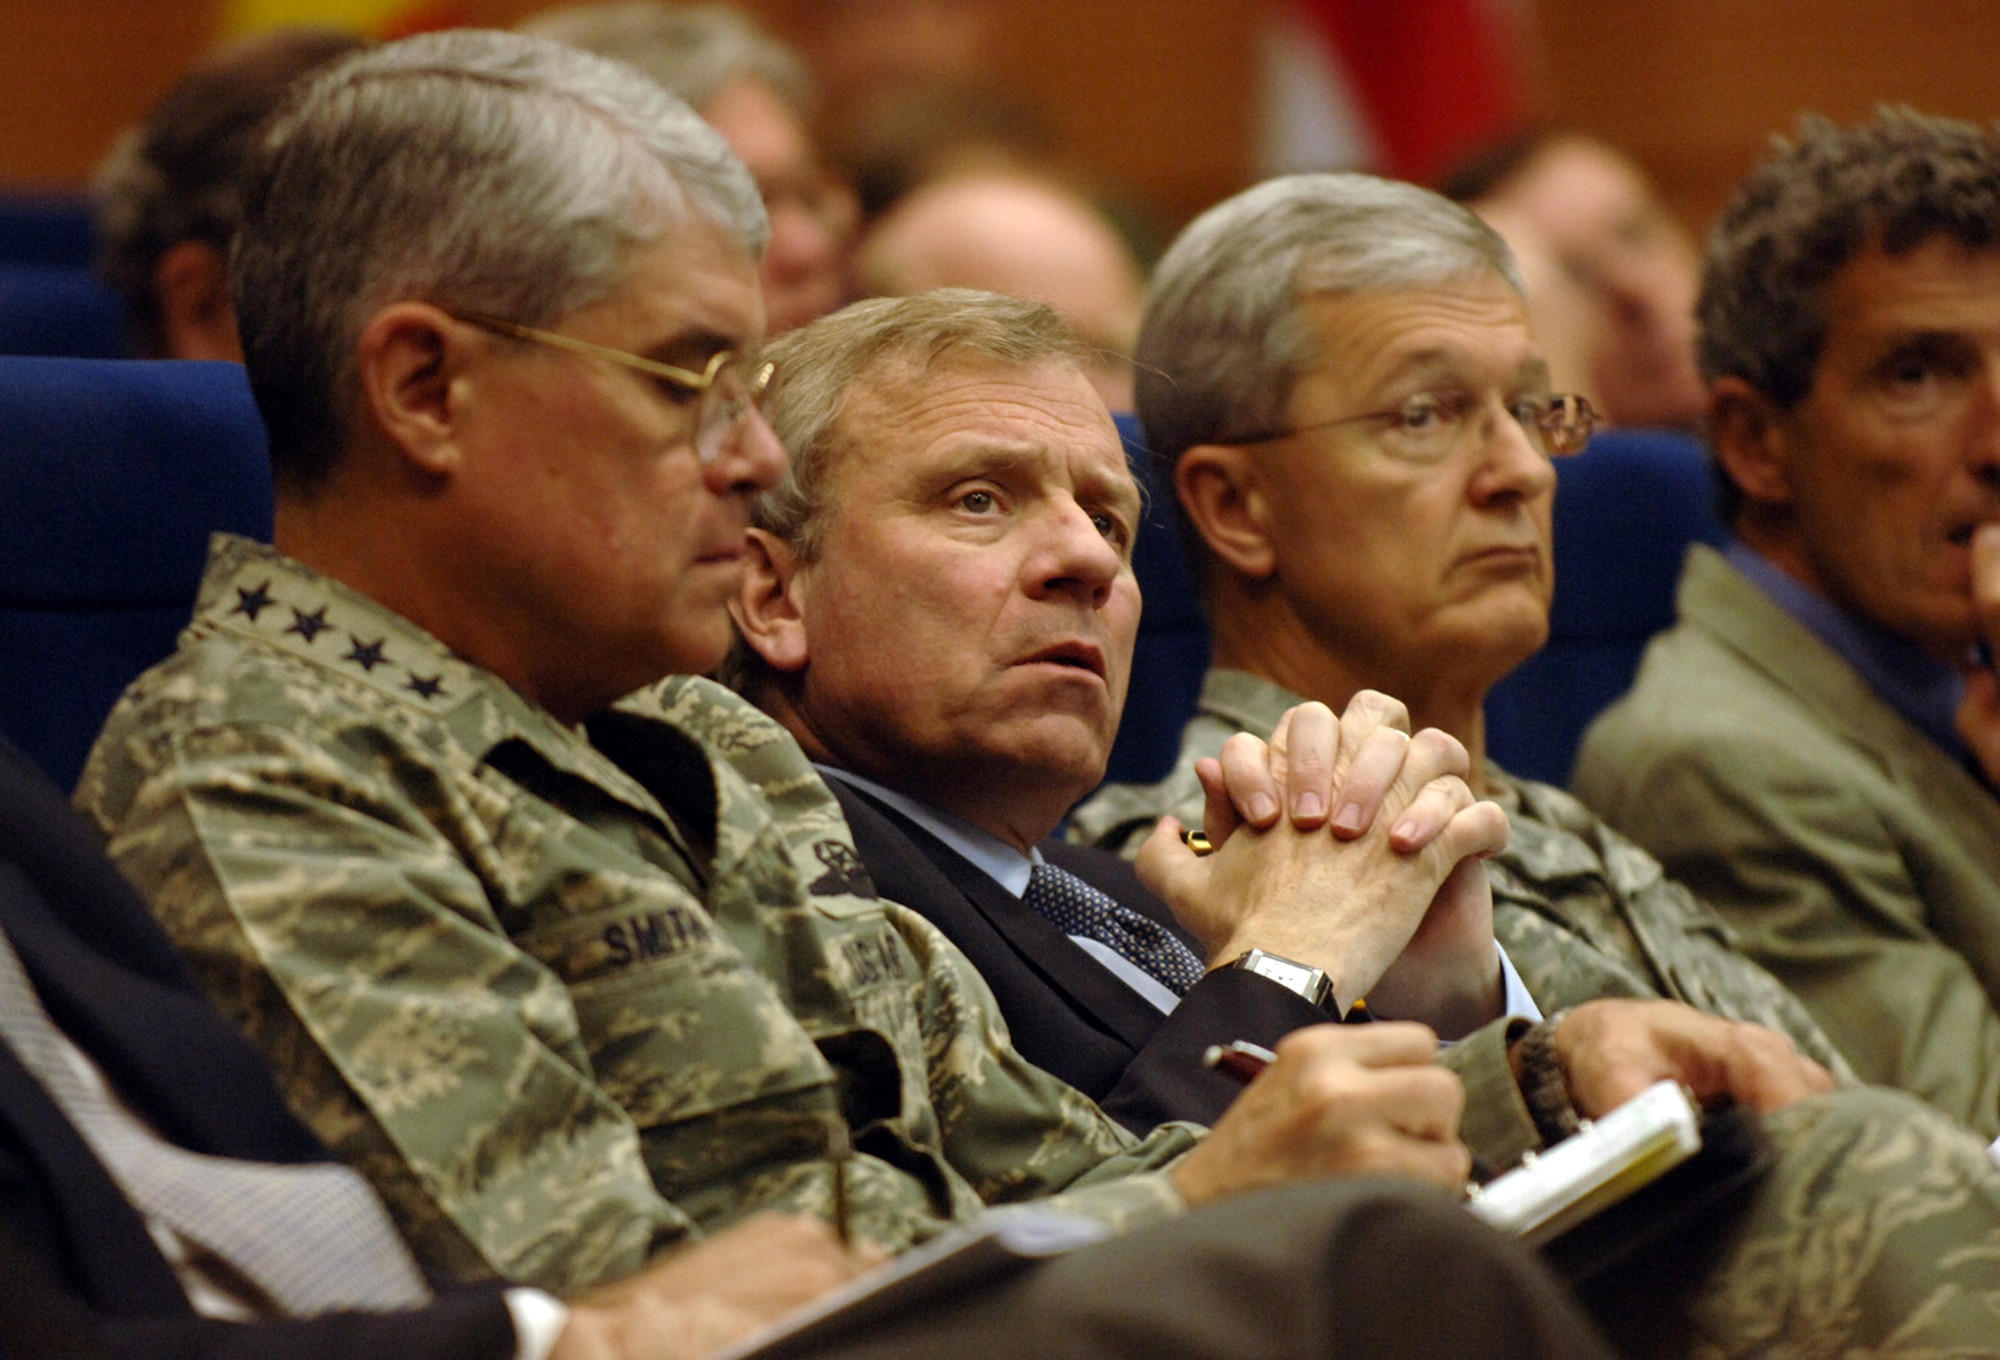 NATO Secretary General Jaap de Hoop Scheffer, flanked by Gen. Lance L. Smith (left)   and Army Gen. John Craddock tune into a lecture May 4 during the week-long NATO Response Force Exercise Allied Reach '07 at Allied Air Component Command Headquarters at Ramstein Air Base, Germany. The NATO commanders, along with representatives from 26 NATO nations attended the exercise that examined the command and control, logistics and training of the NATO Response Force at the strategic and operational levels. General Smith is the commander, U.S. Joint Forces Command/NATO Supreme Allied Commander Transformation. General Craddock is the Supreme Allied Commander, Europe. (U.S. Air Force photo/Master Sgt. Scott Wagers) 
